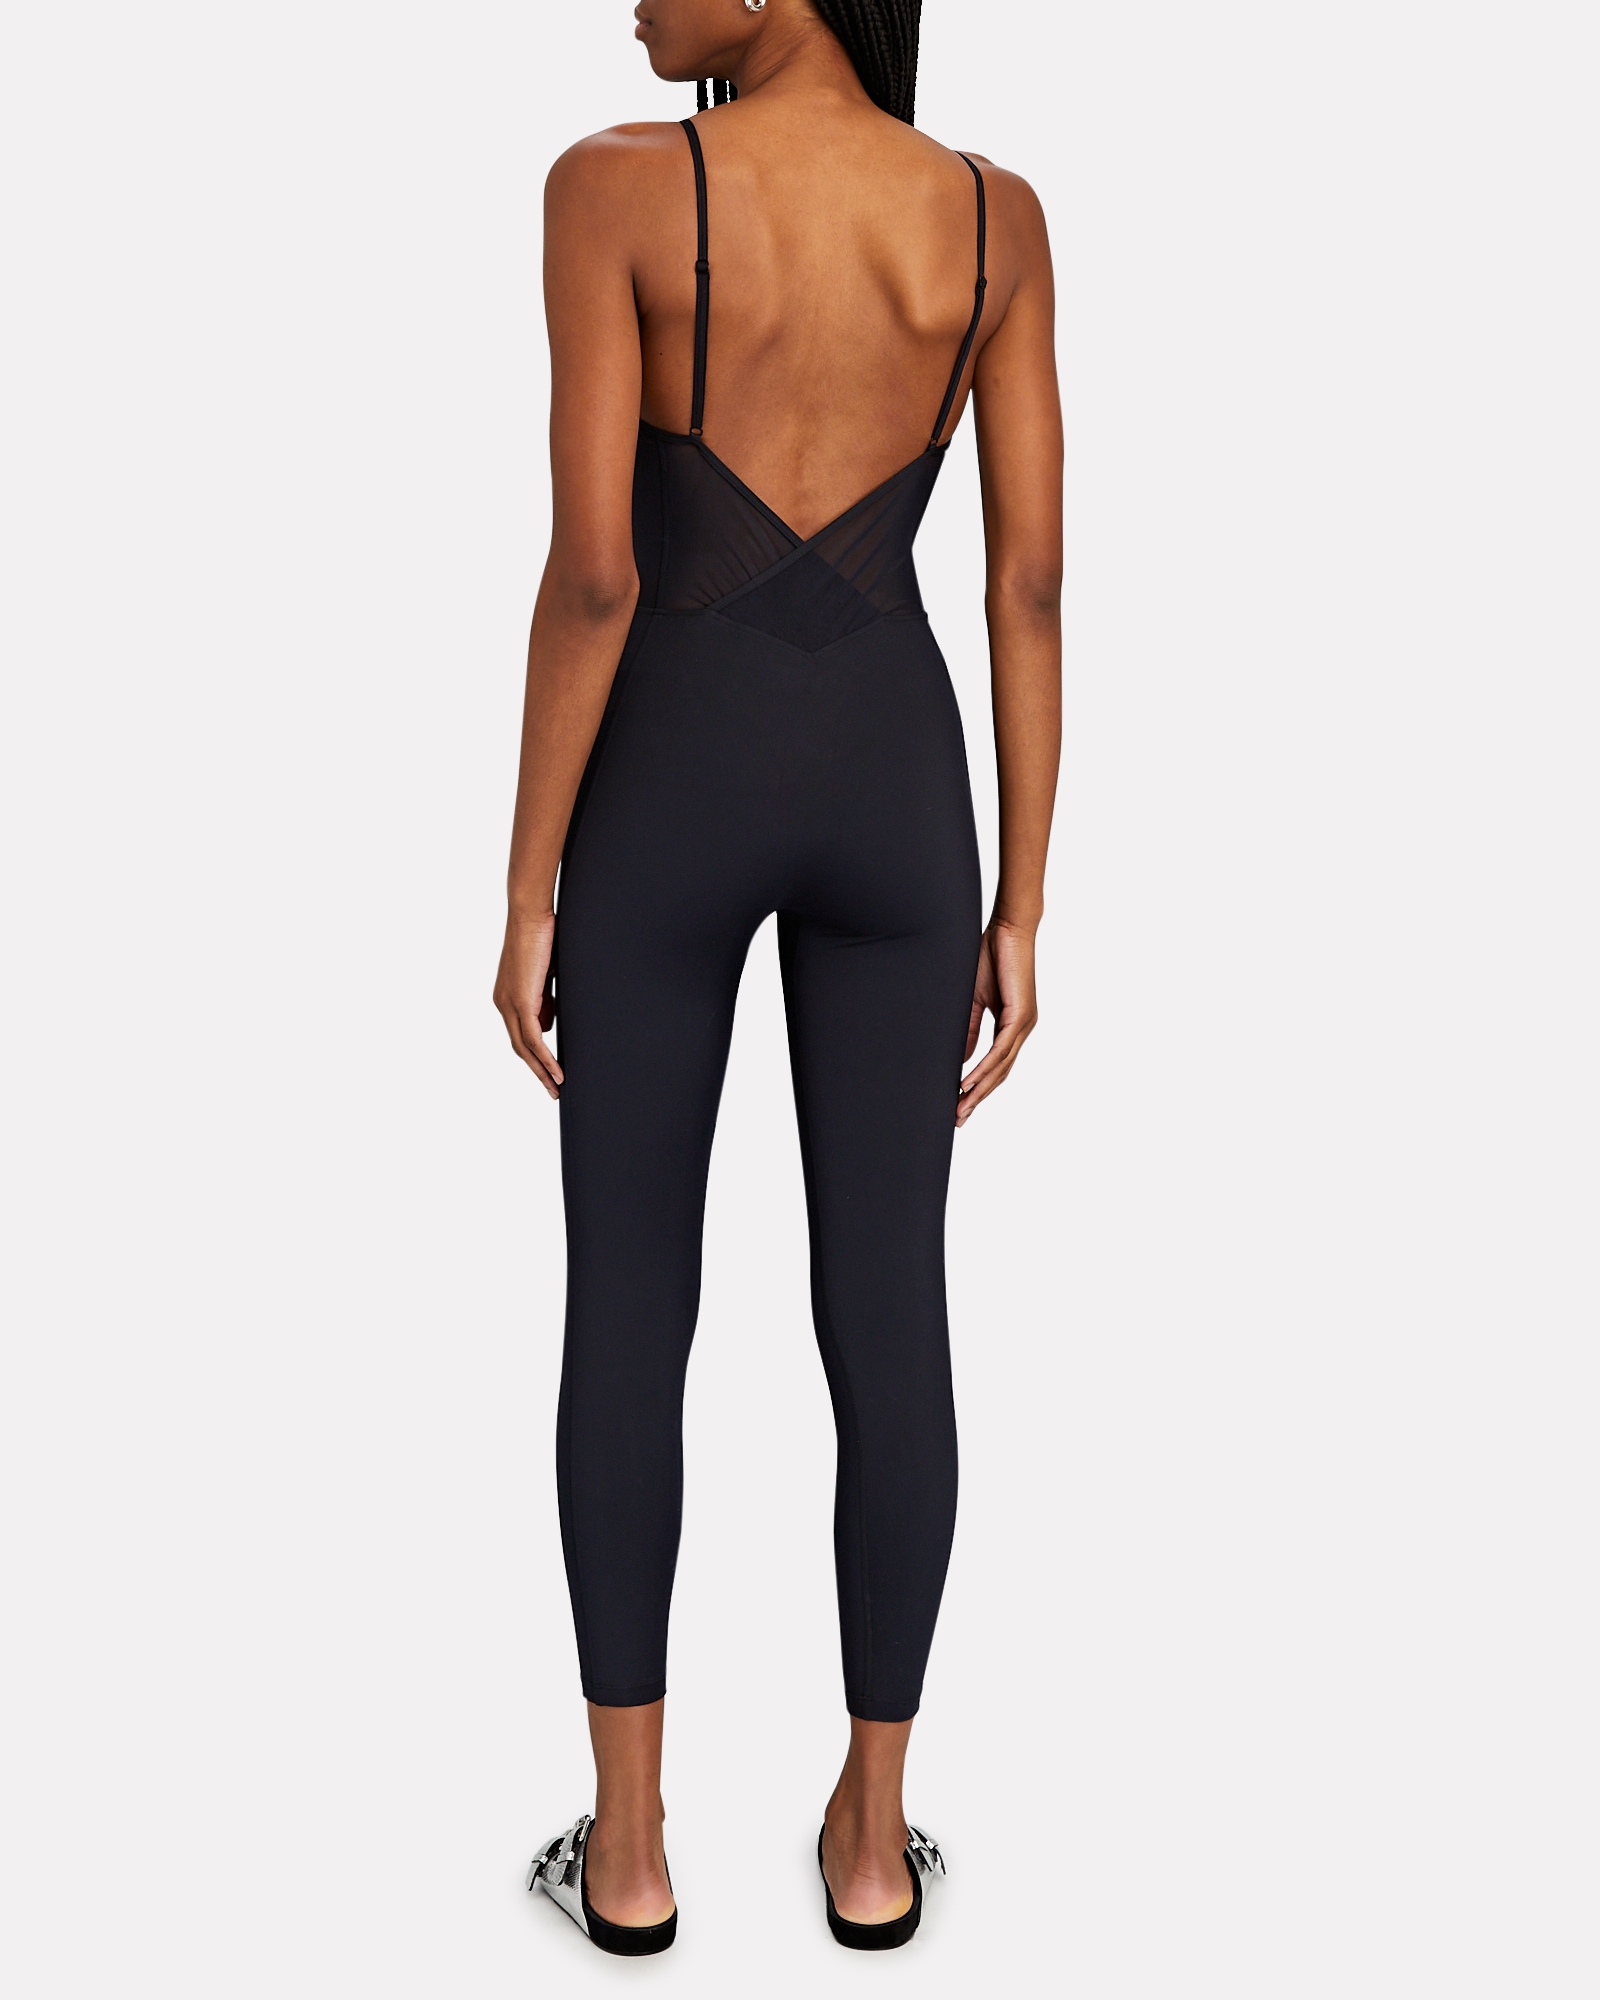 Le ORE Andria Jersey Catsuit | INTERMIX®